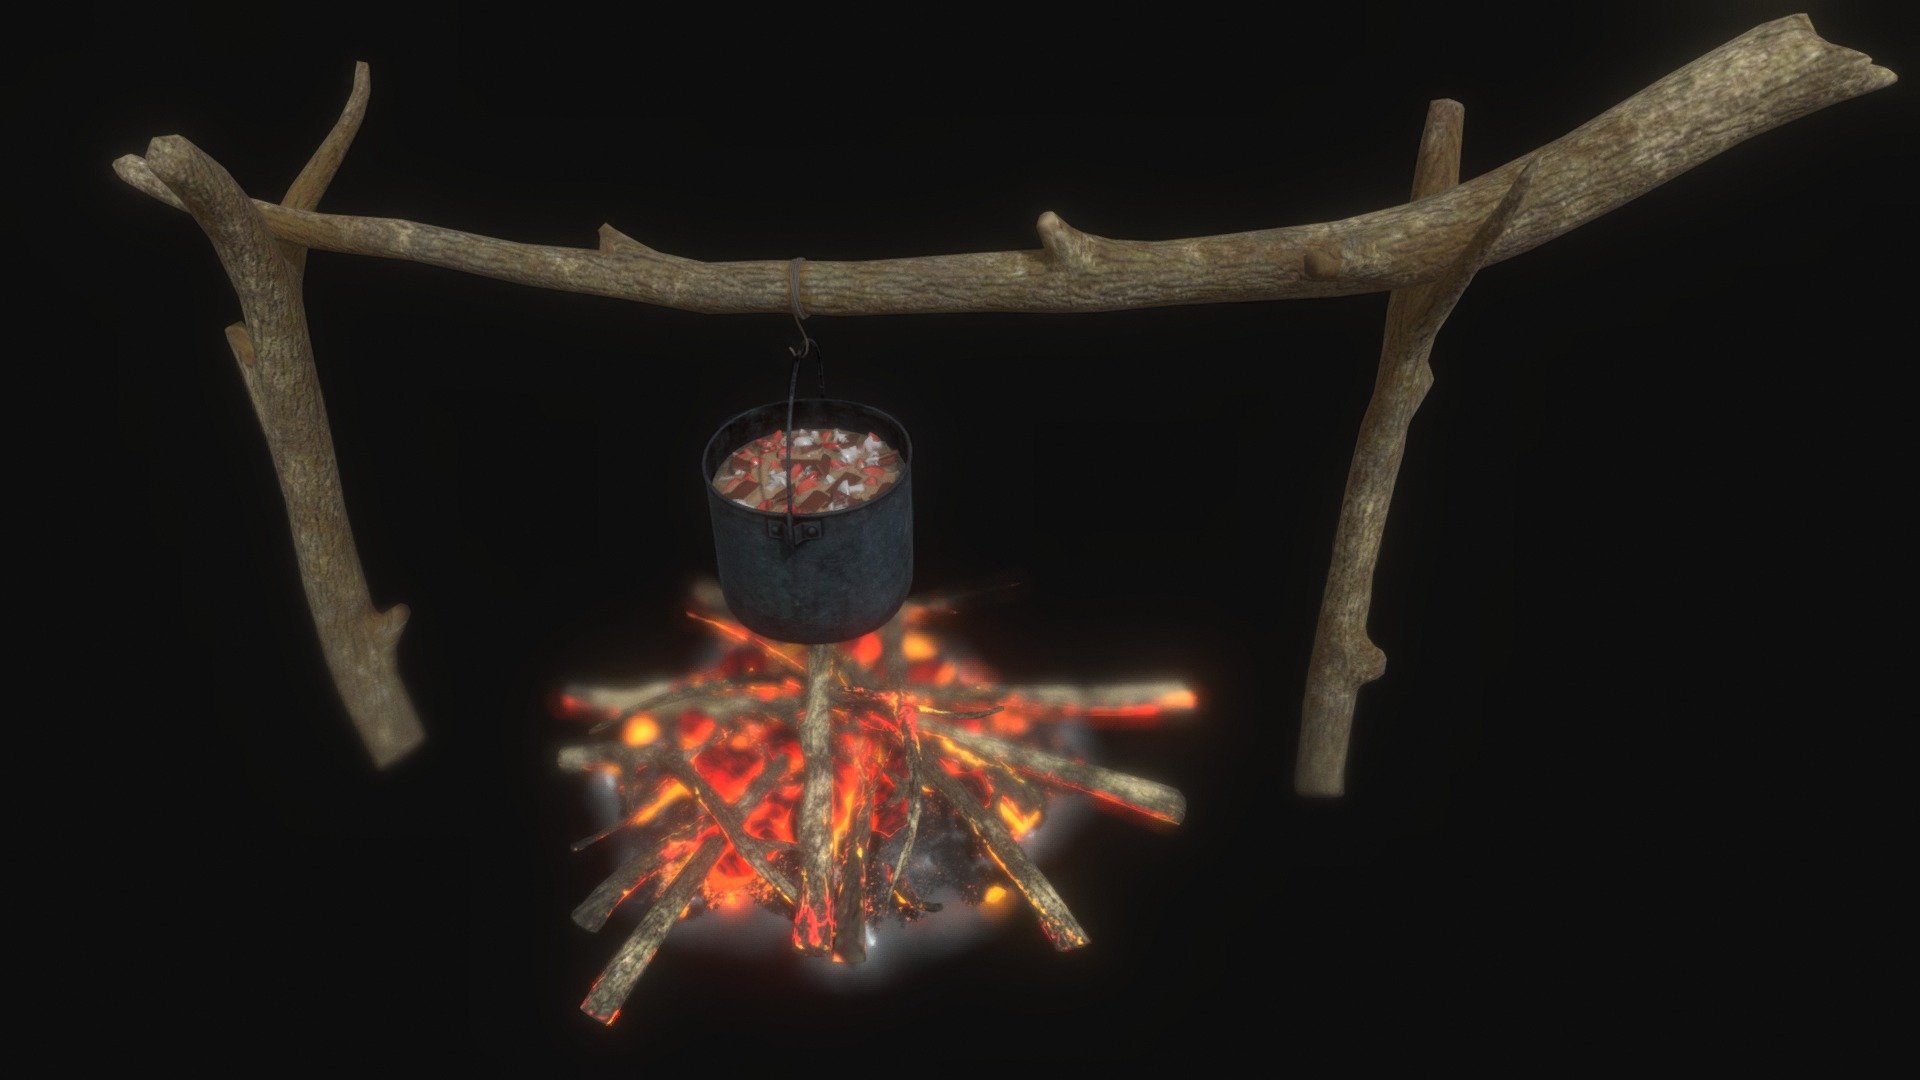 The model of soup cooking on the fire

Low poly model
The model is ready for using in games PBR textured and low poly
it is appropriate to use this asset in forests or camping scenes, cooking mushroom soup

Objects - 6

Vertices - 8 822

Edges - 24 848

Faces - 16 082

Triangles - 17 185

game ready
PBR - (color) (Metalic) (Roghness) (Normal) (Emission) (Alpha) - Soup in camping - 3D model by Gajk.Mv 3d model